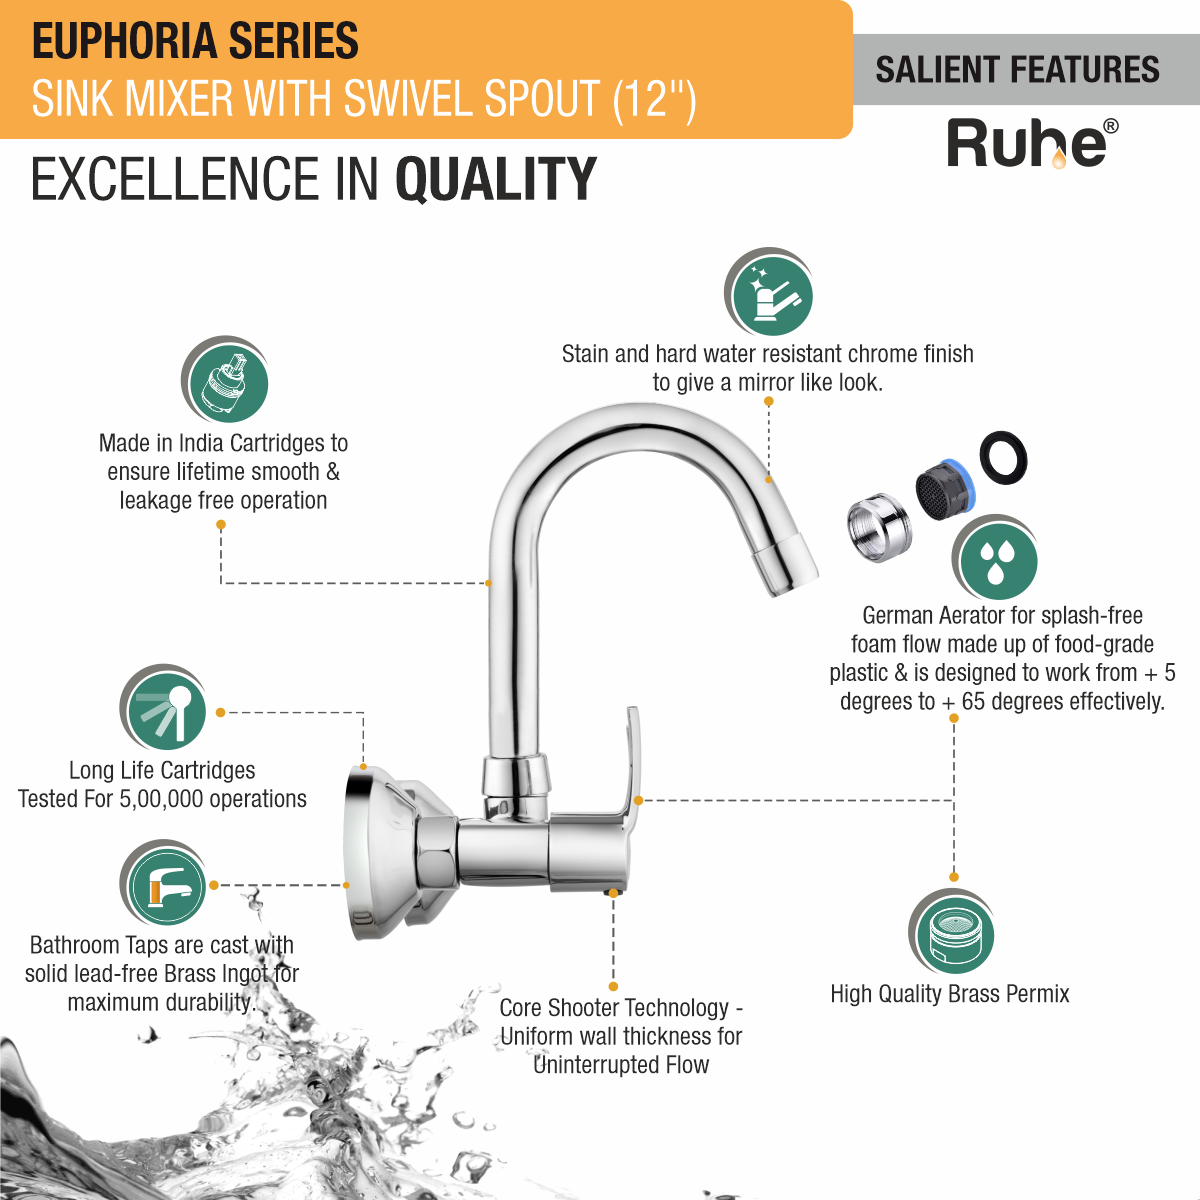 Euphoria Sink Mixer with Small (12 inches) Round Swivel Spout Faucet features